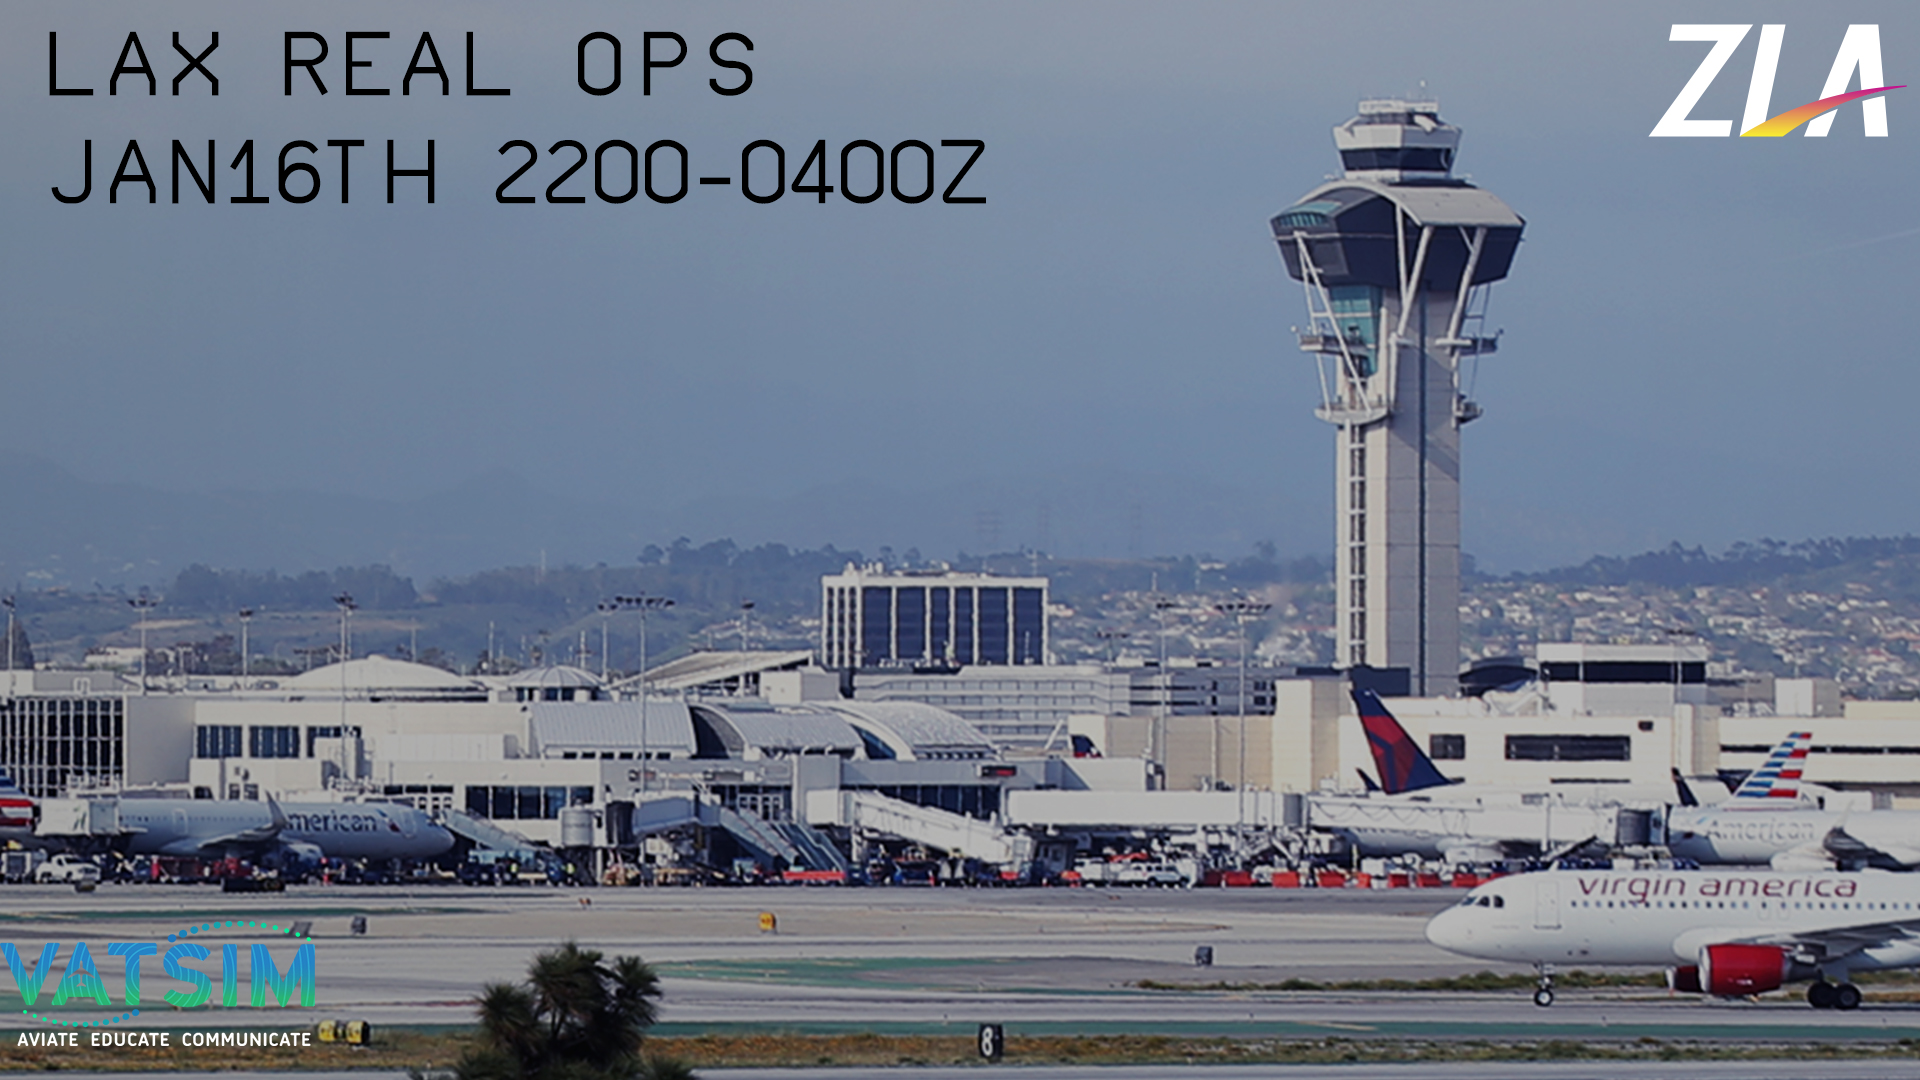 LAX Real Ops